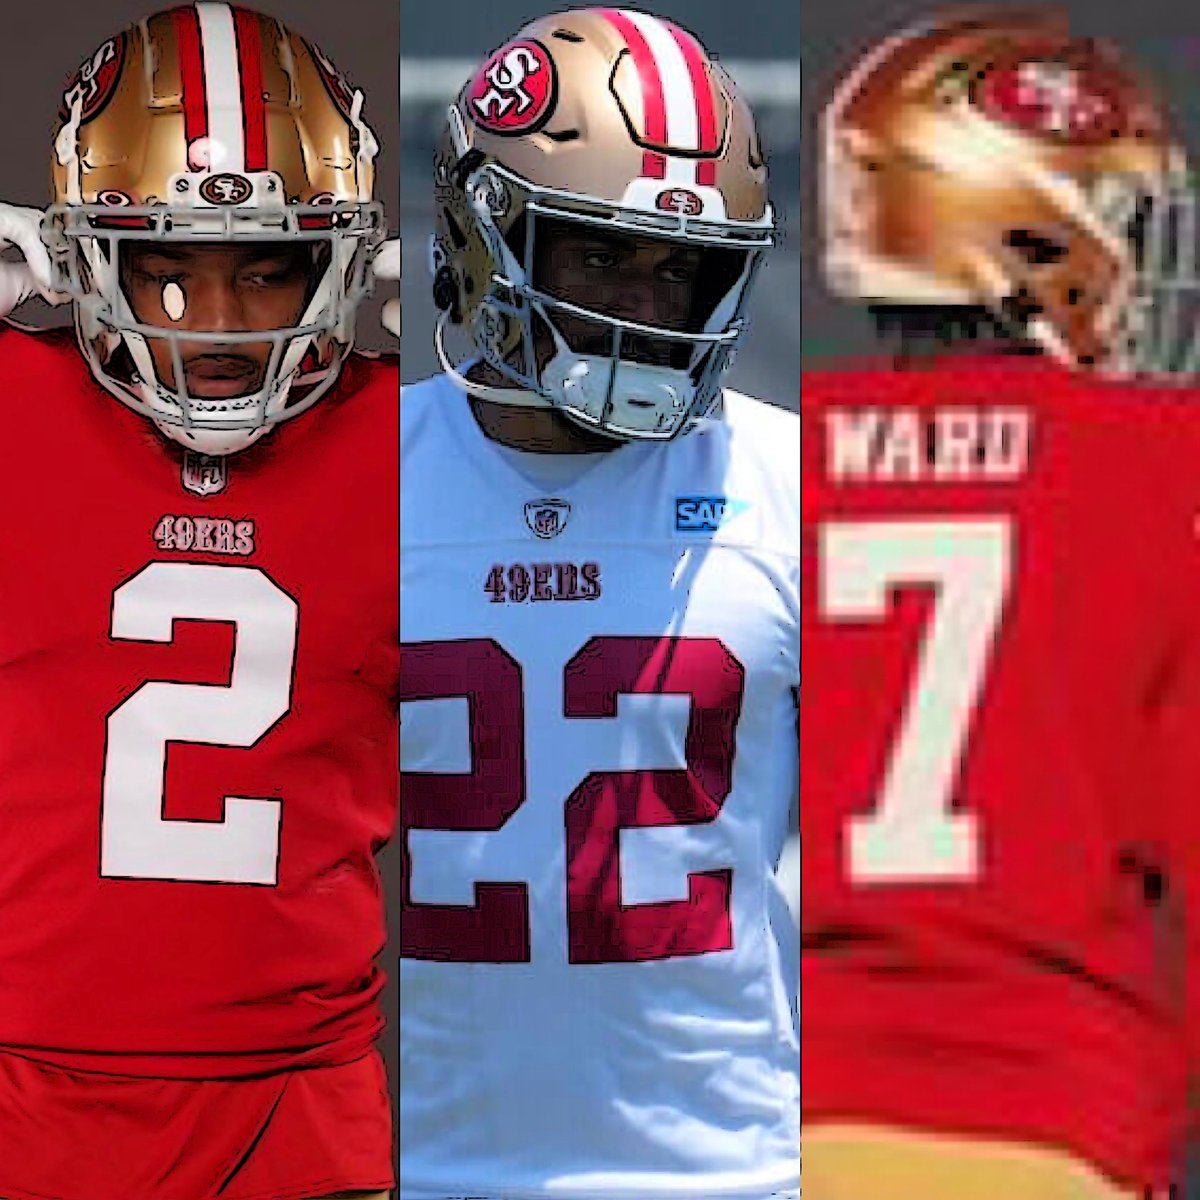 RT @49er_edits: This Trio is being underestimated …. CB Lenoir, Oliver and Ward. #49ers #FTTB https://t.co/a5plWEhBTh